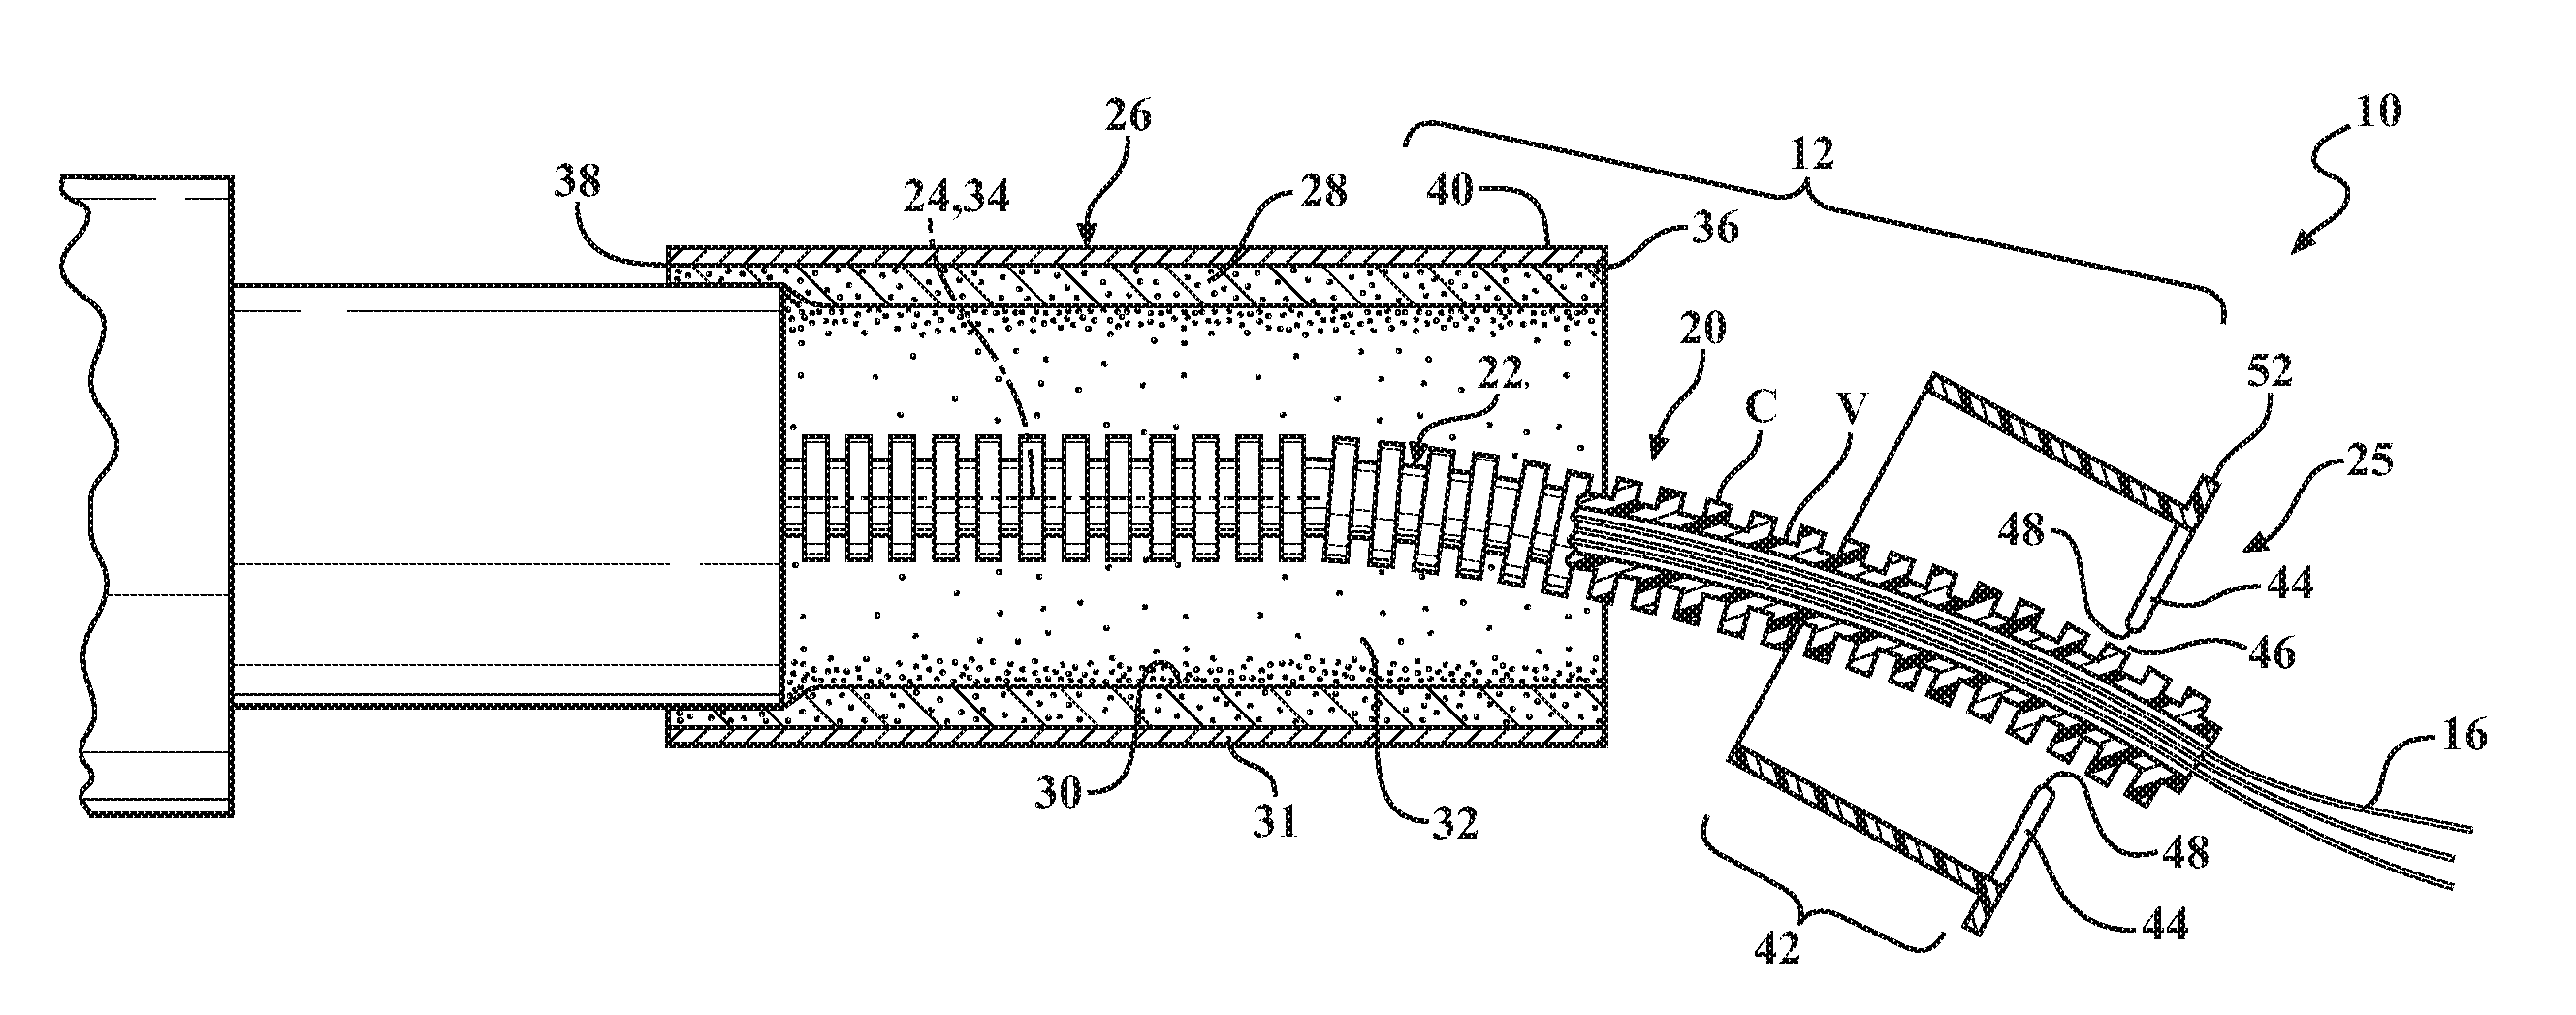 Thermal sleeve with self-adjusting positioning member, assembly therewith and method protecting a temperature sensitive member therewith